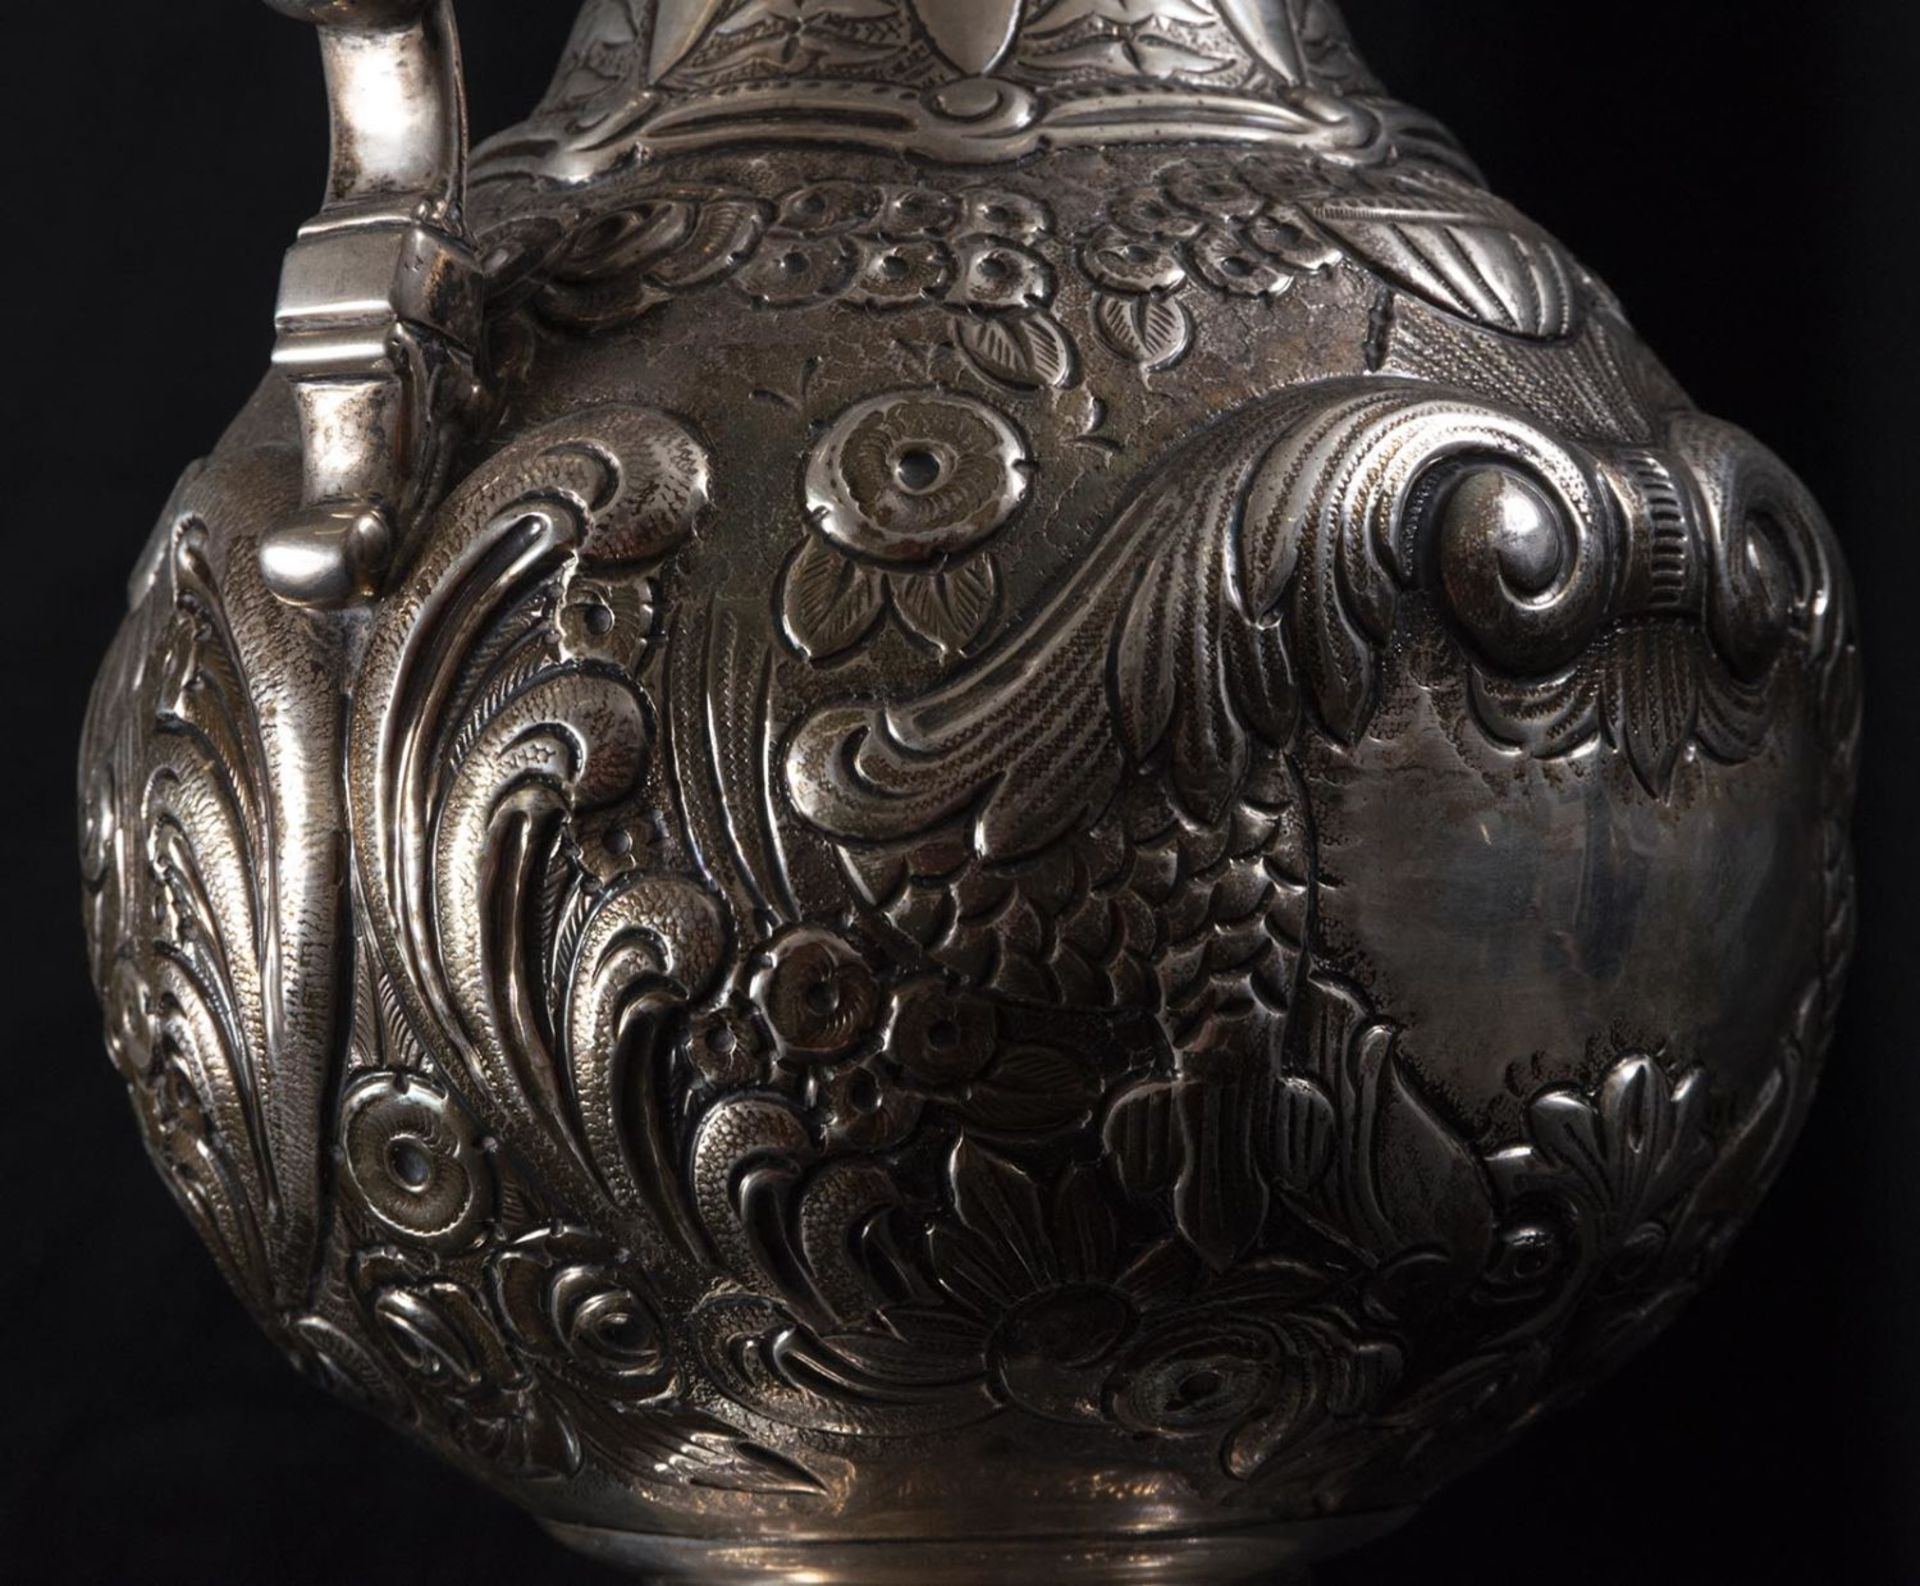 Large 925 Sterling Silver Jug, 19th century - Image 4 of 5